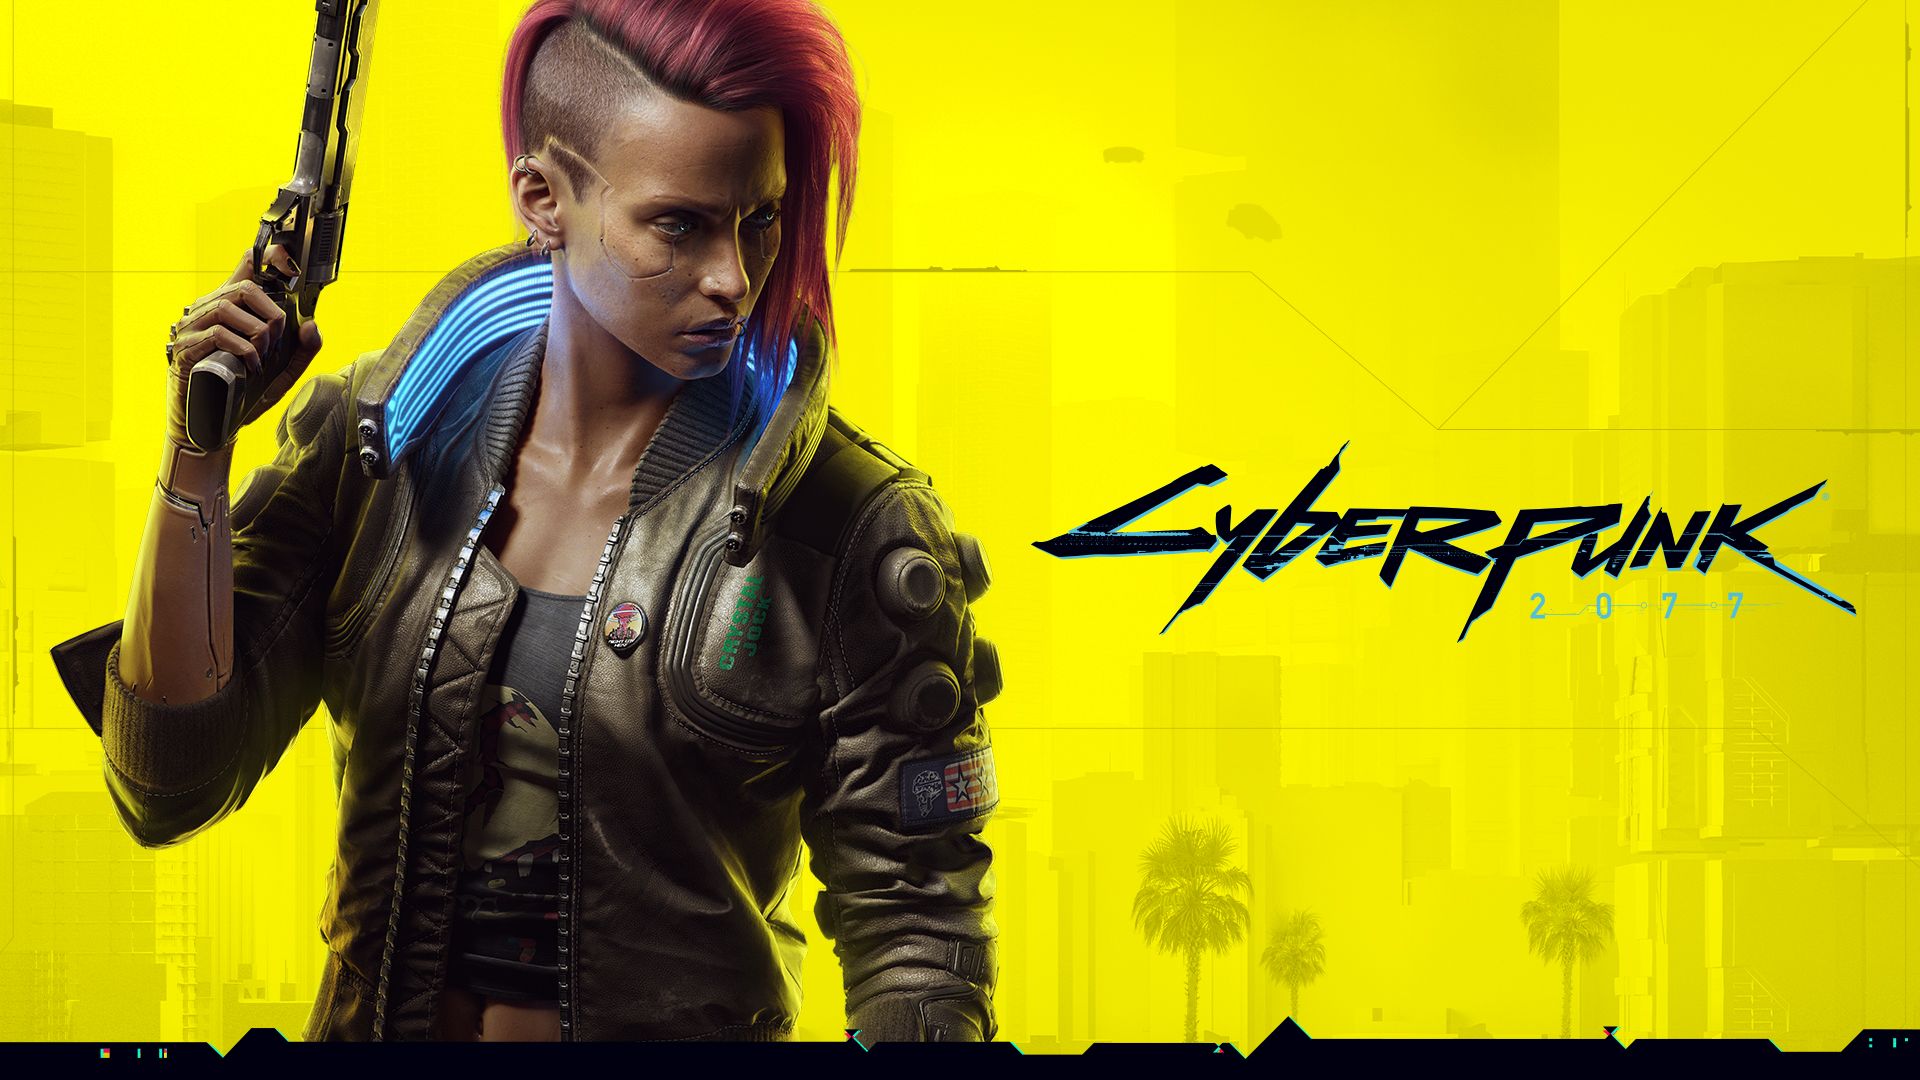 An image of V from the open-world game Cyberpunk 2077